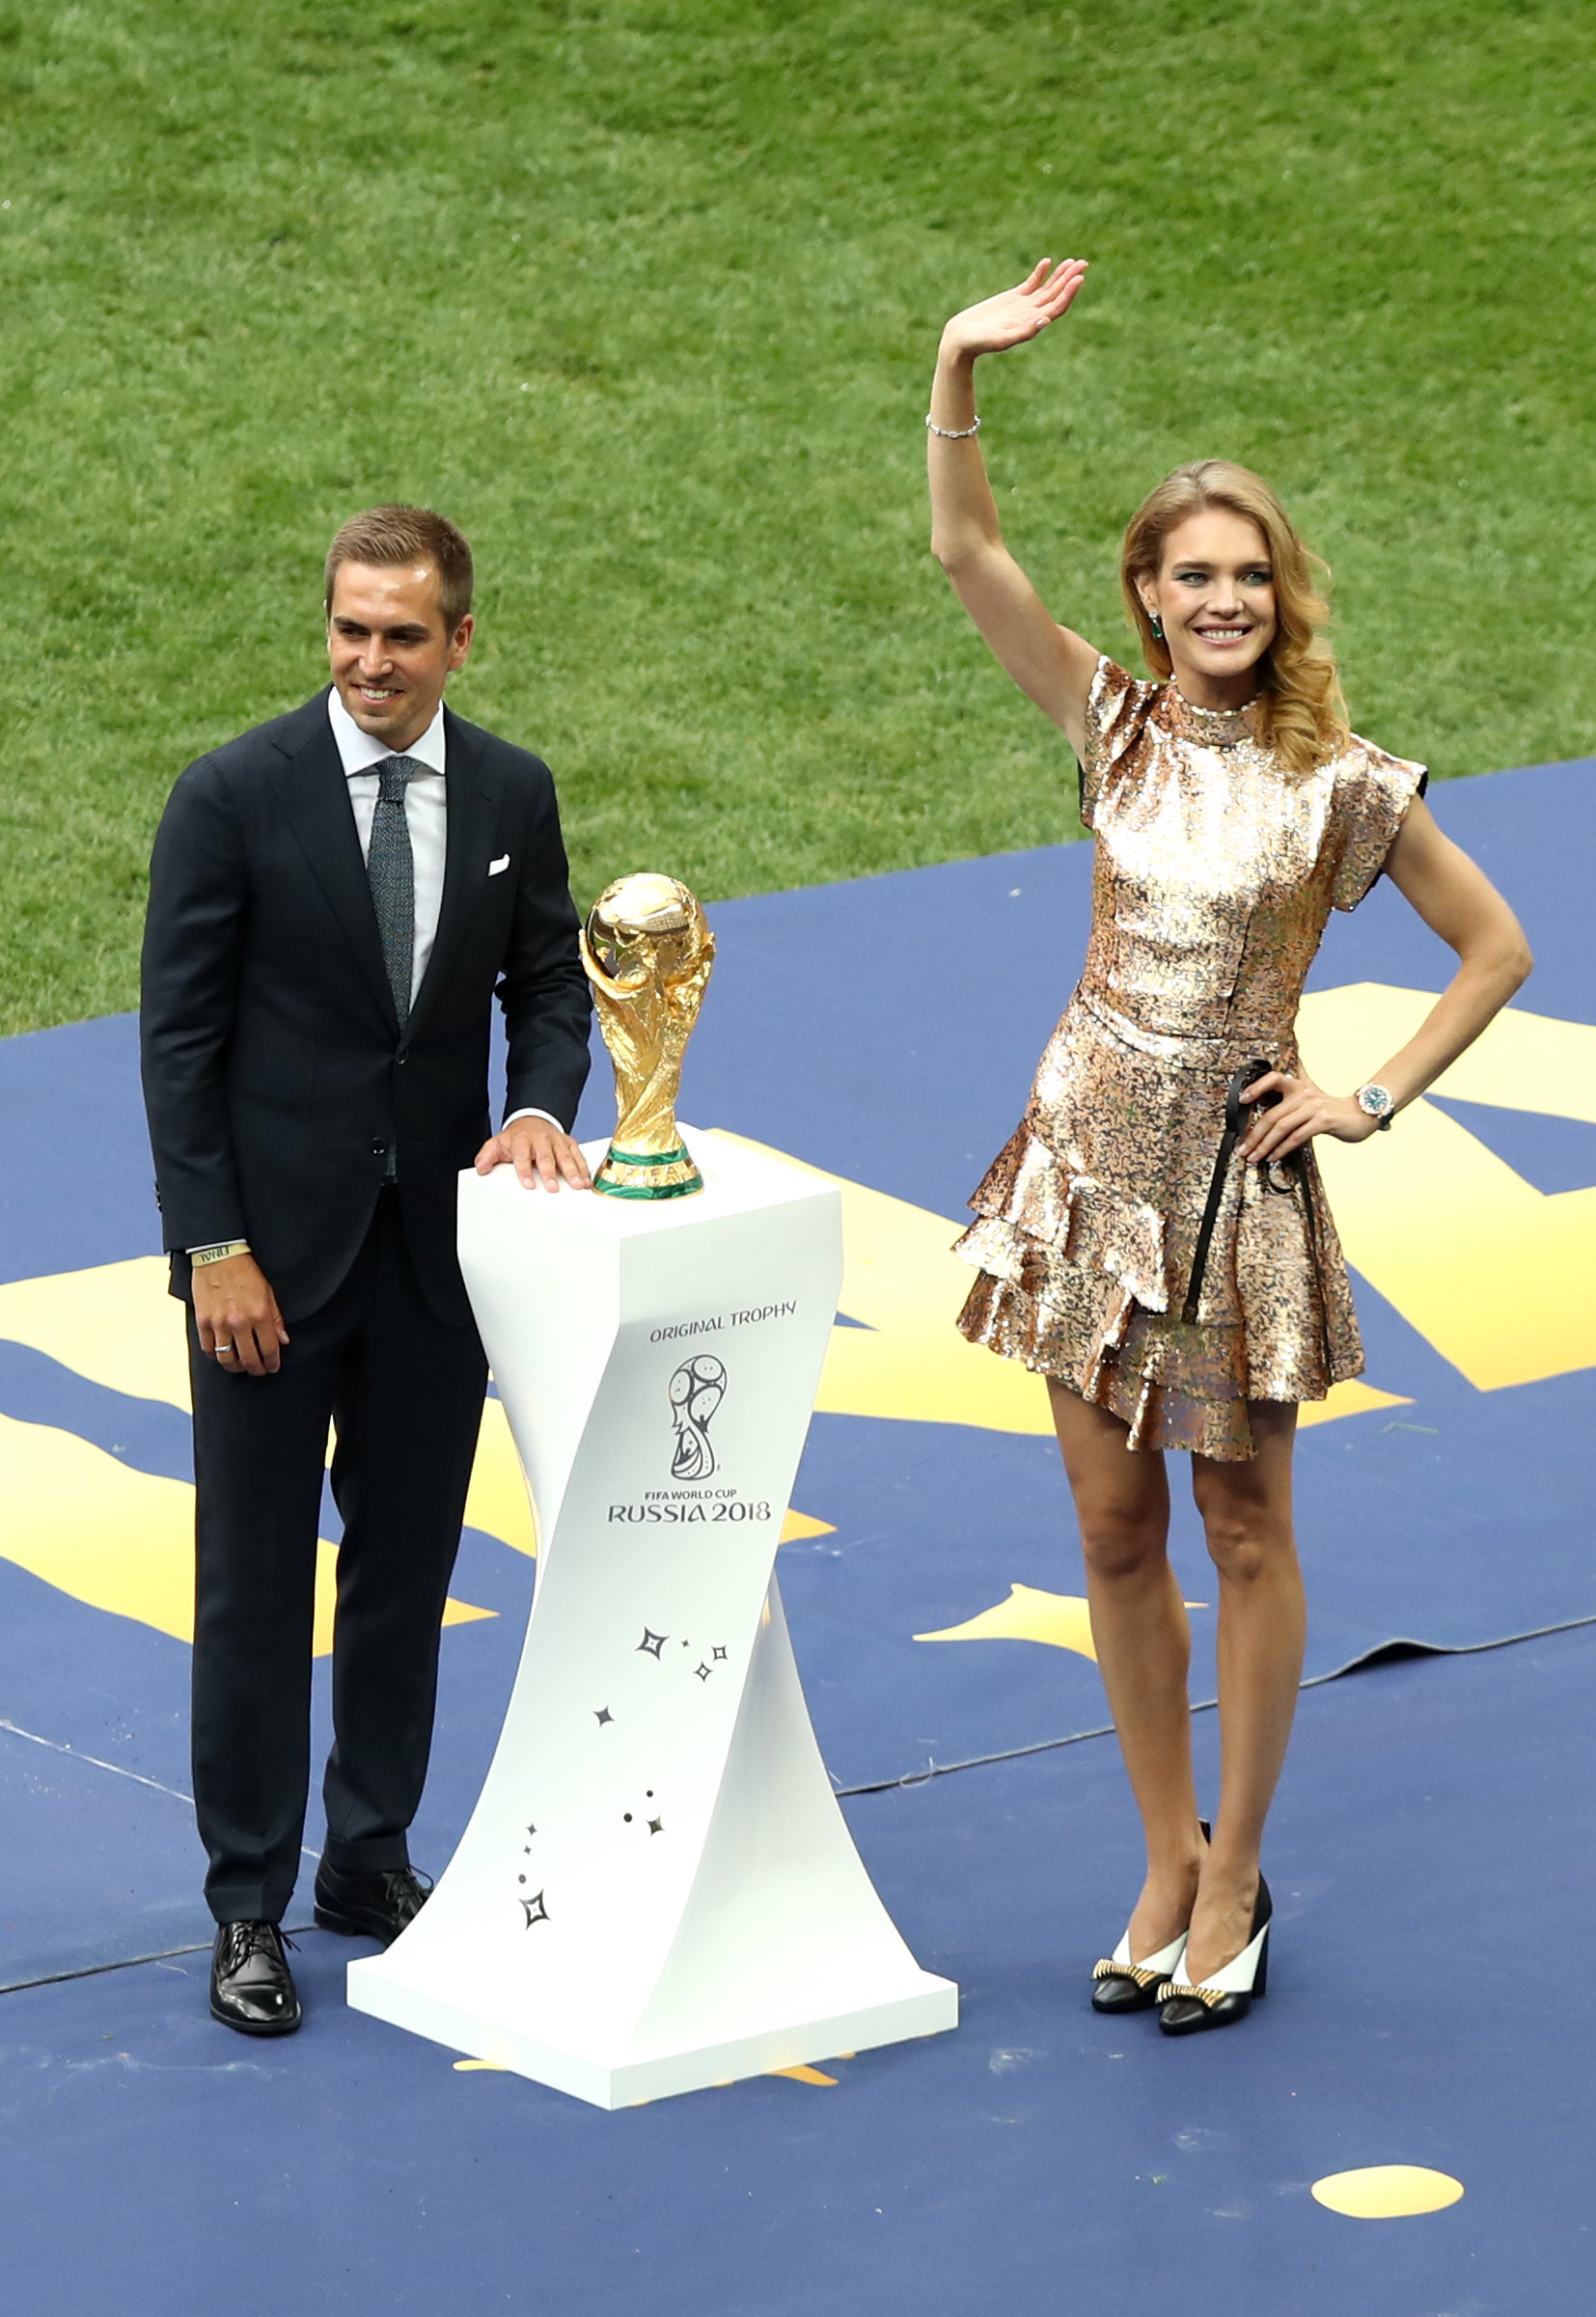 FIFA World Cup Russia 2018: Natalia Vodianova, the model guardian of the World  Cup trophy - Foto 3 de 14